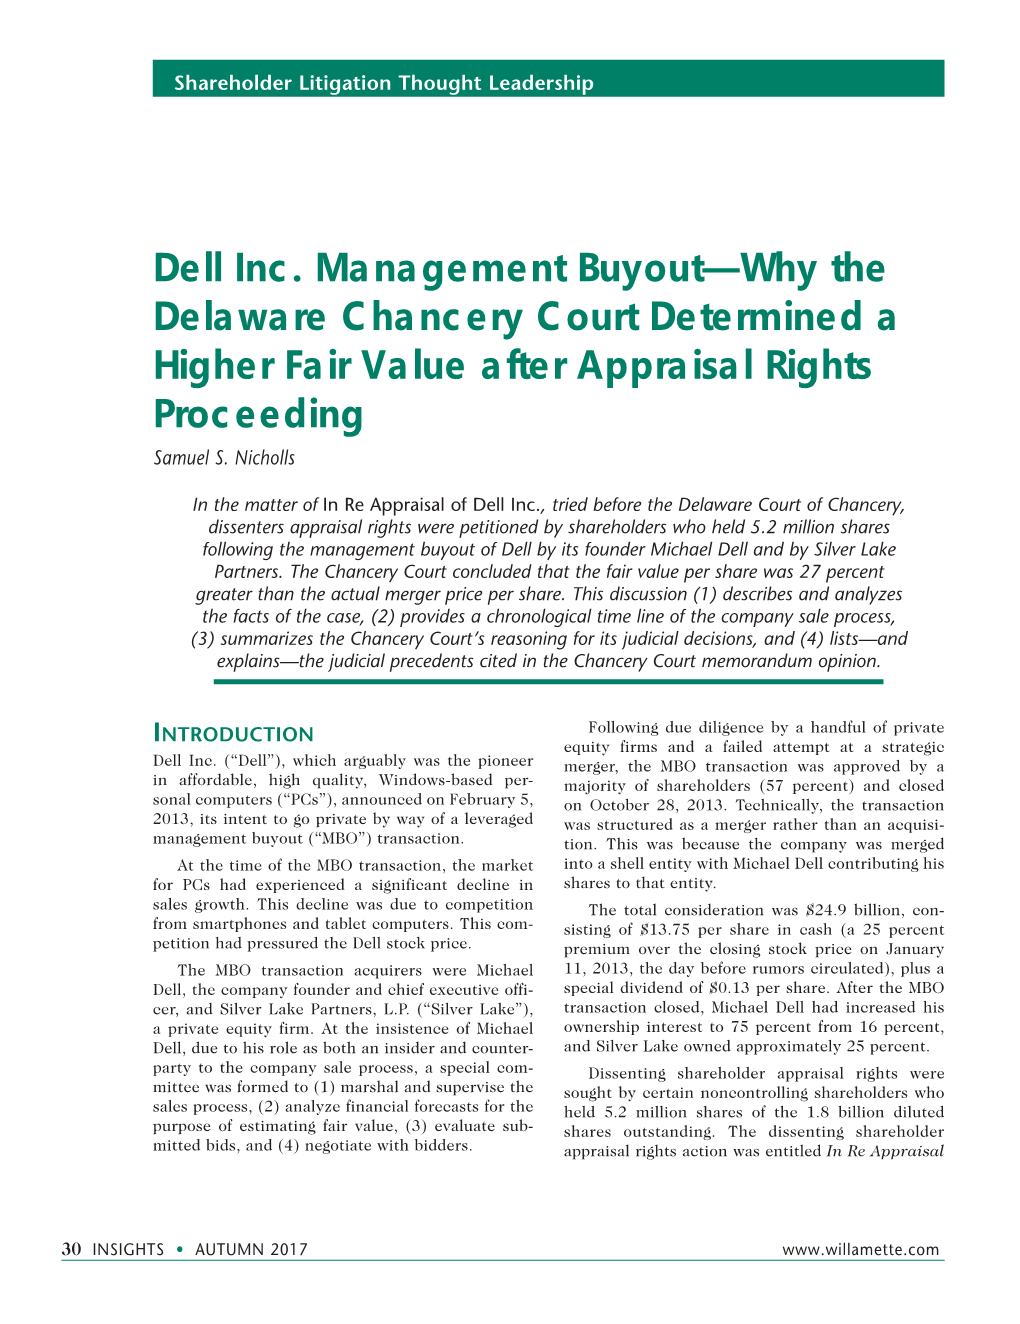 Dell Inc. Management Buyout—Why the Delaware Chancery Court Determined a Higher Fair Value After Appraisal Rights Proceeding Samuel S